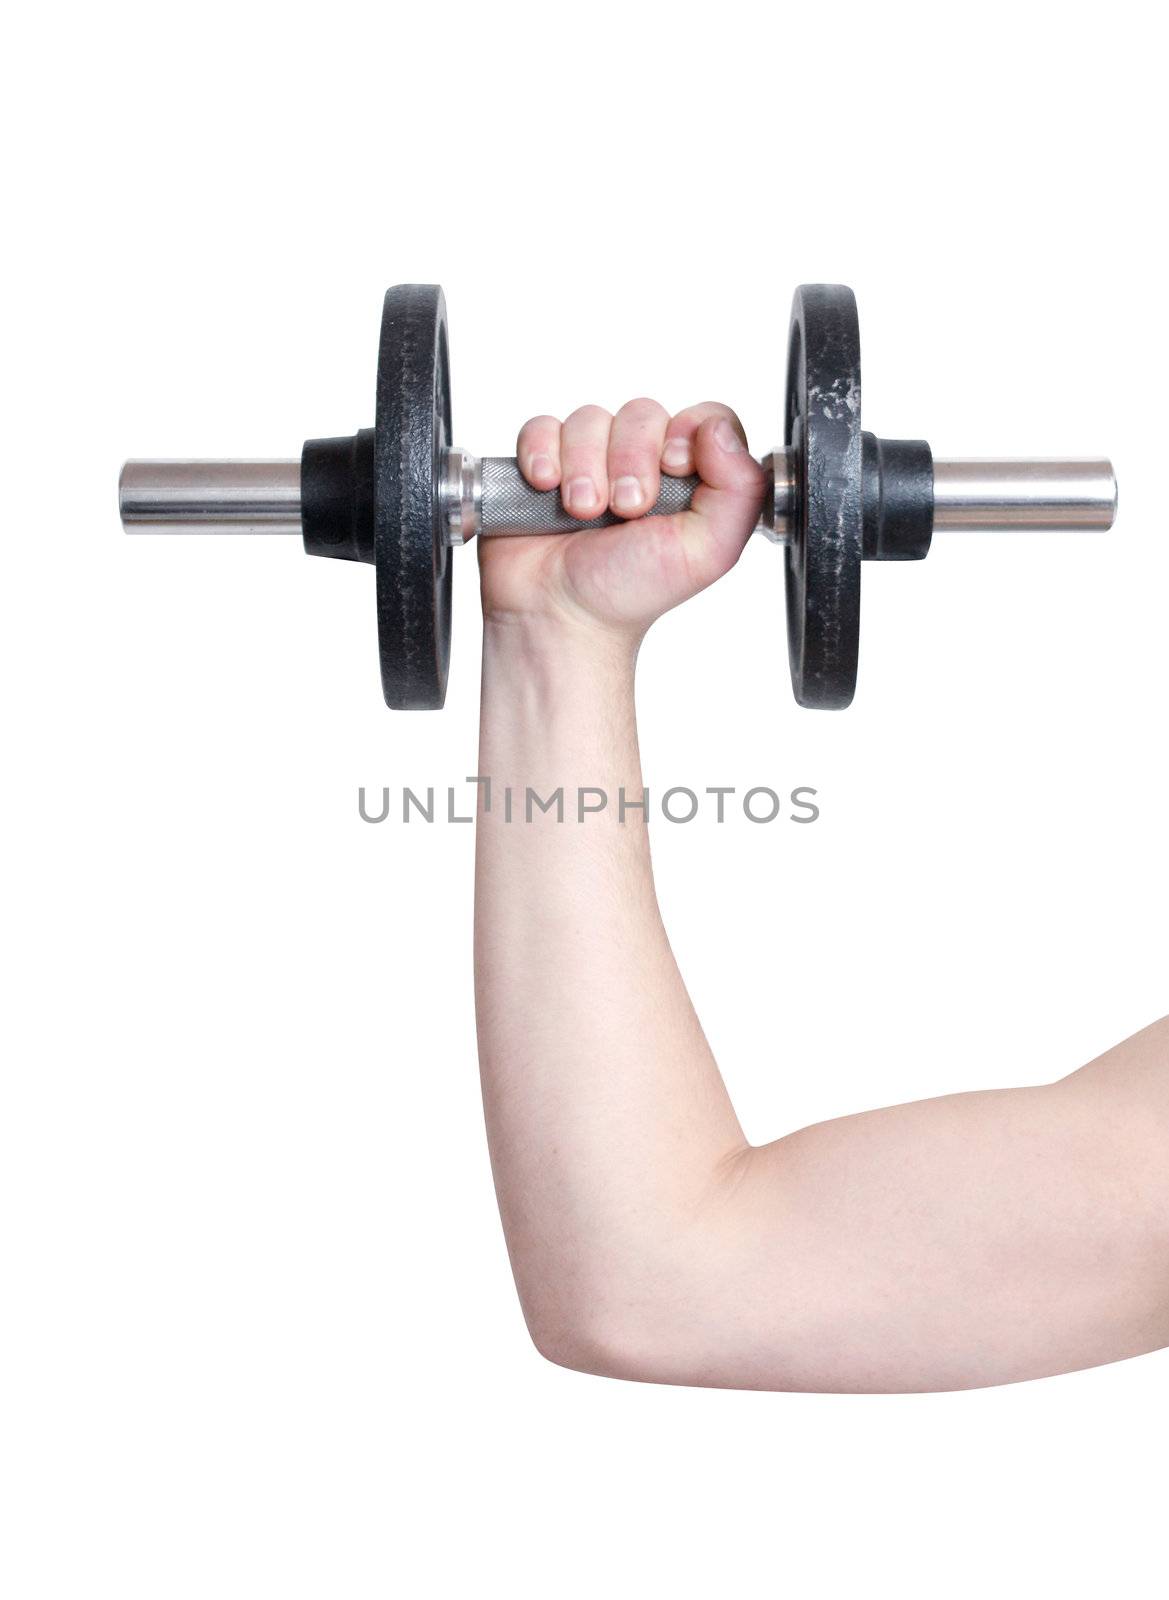 Arm lifting weight by leeser